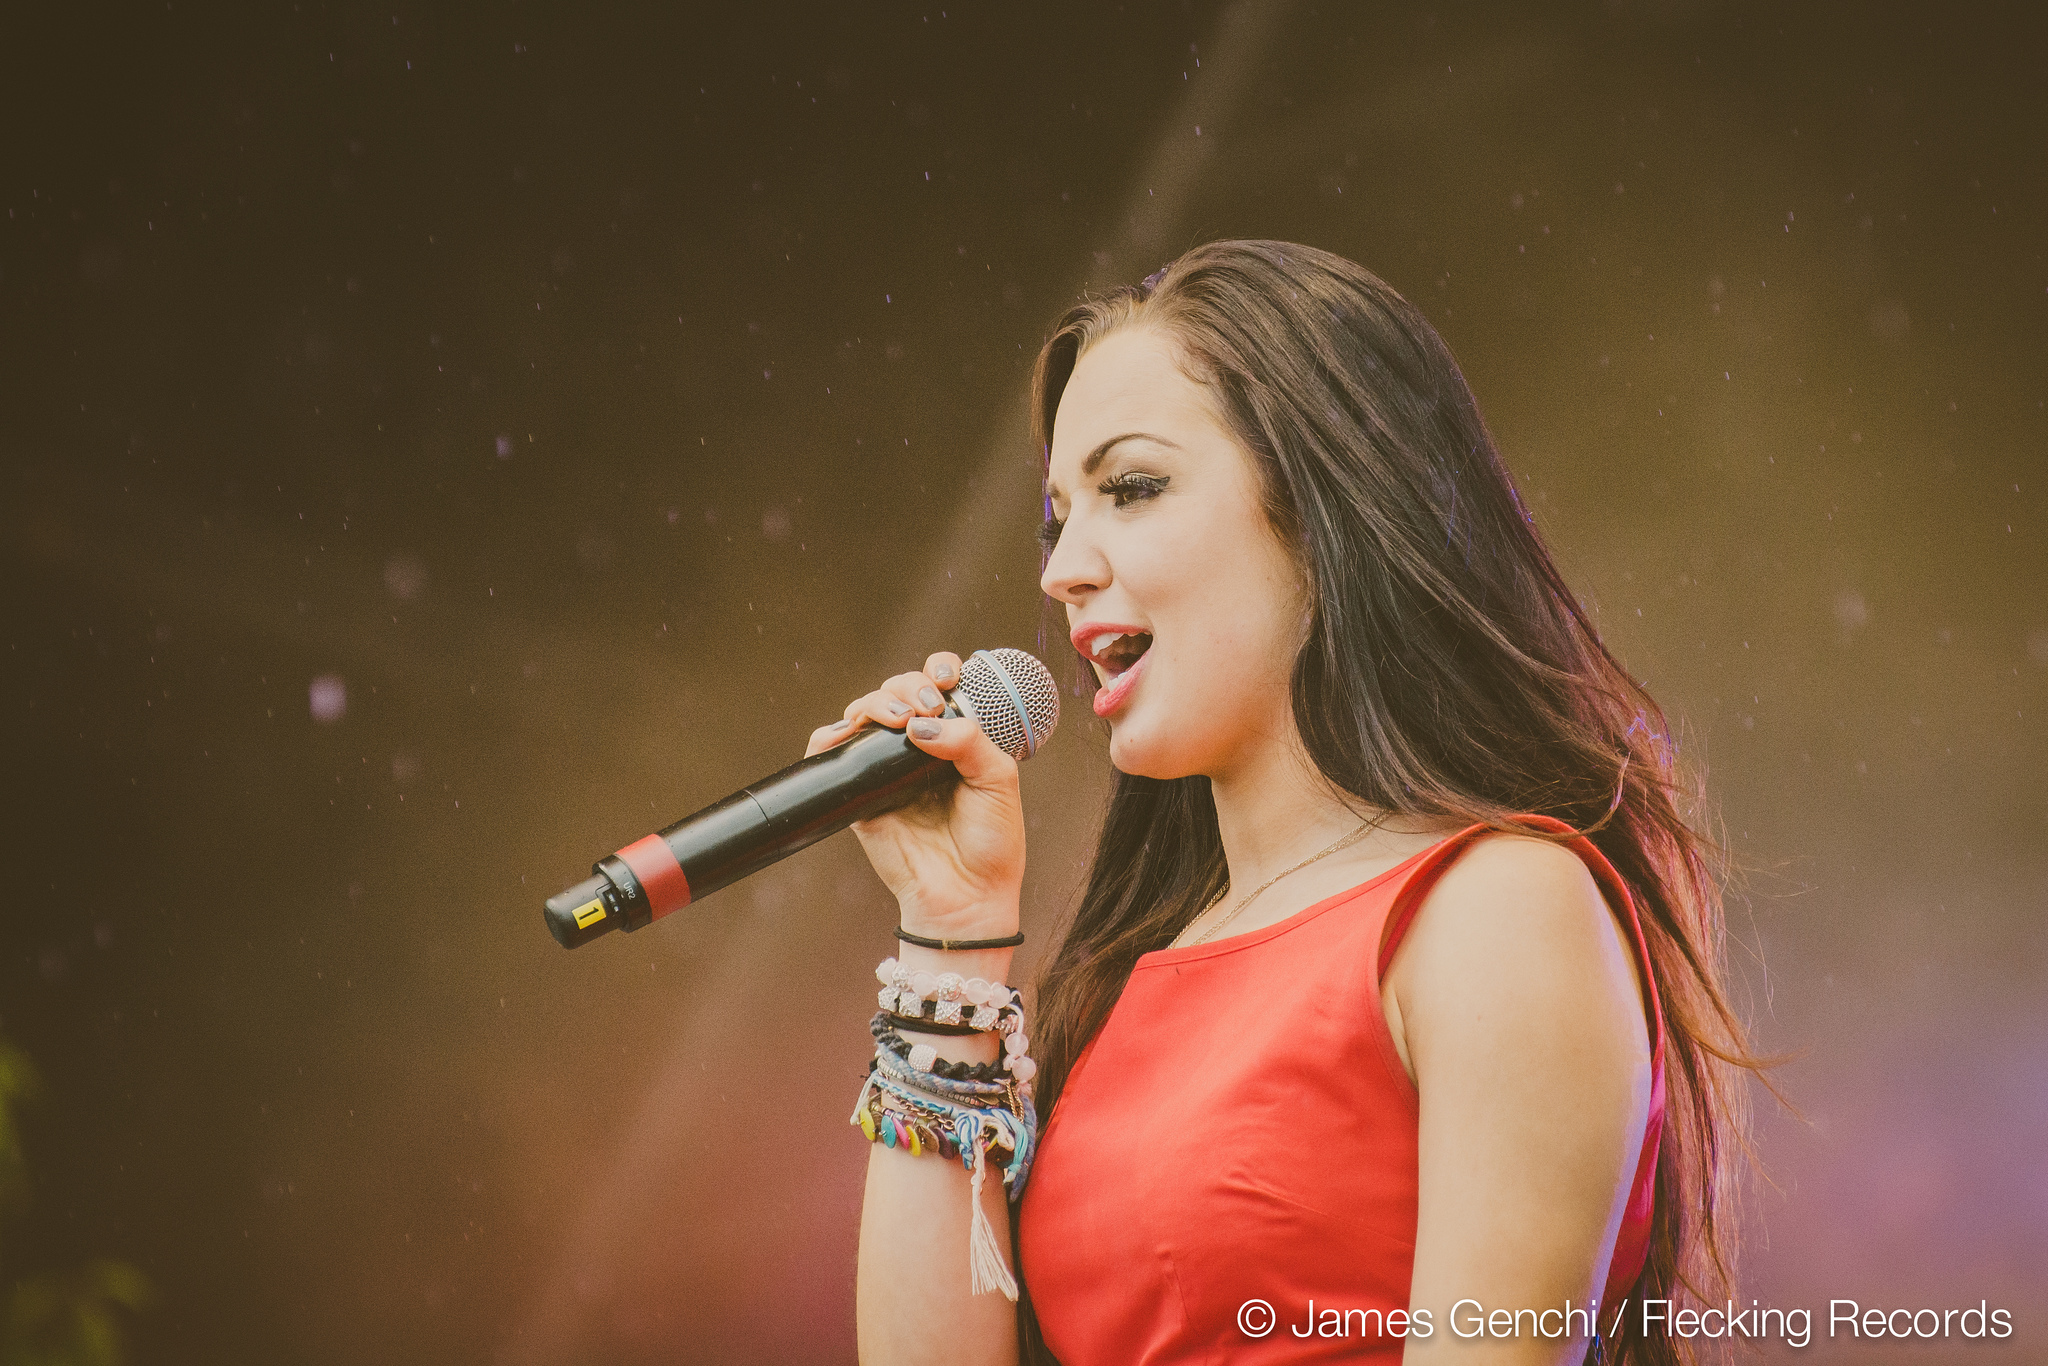 Photos: Tich wins the style battle at Party in the Park, Leeds